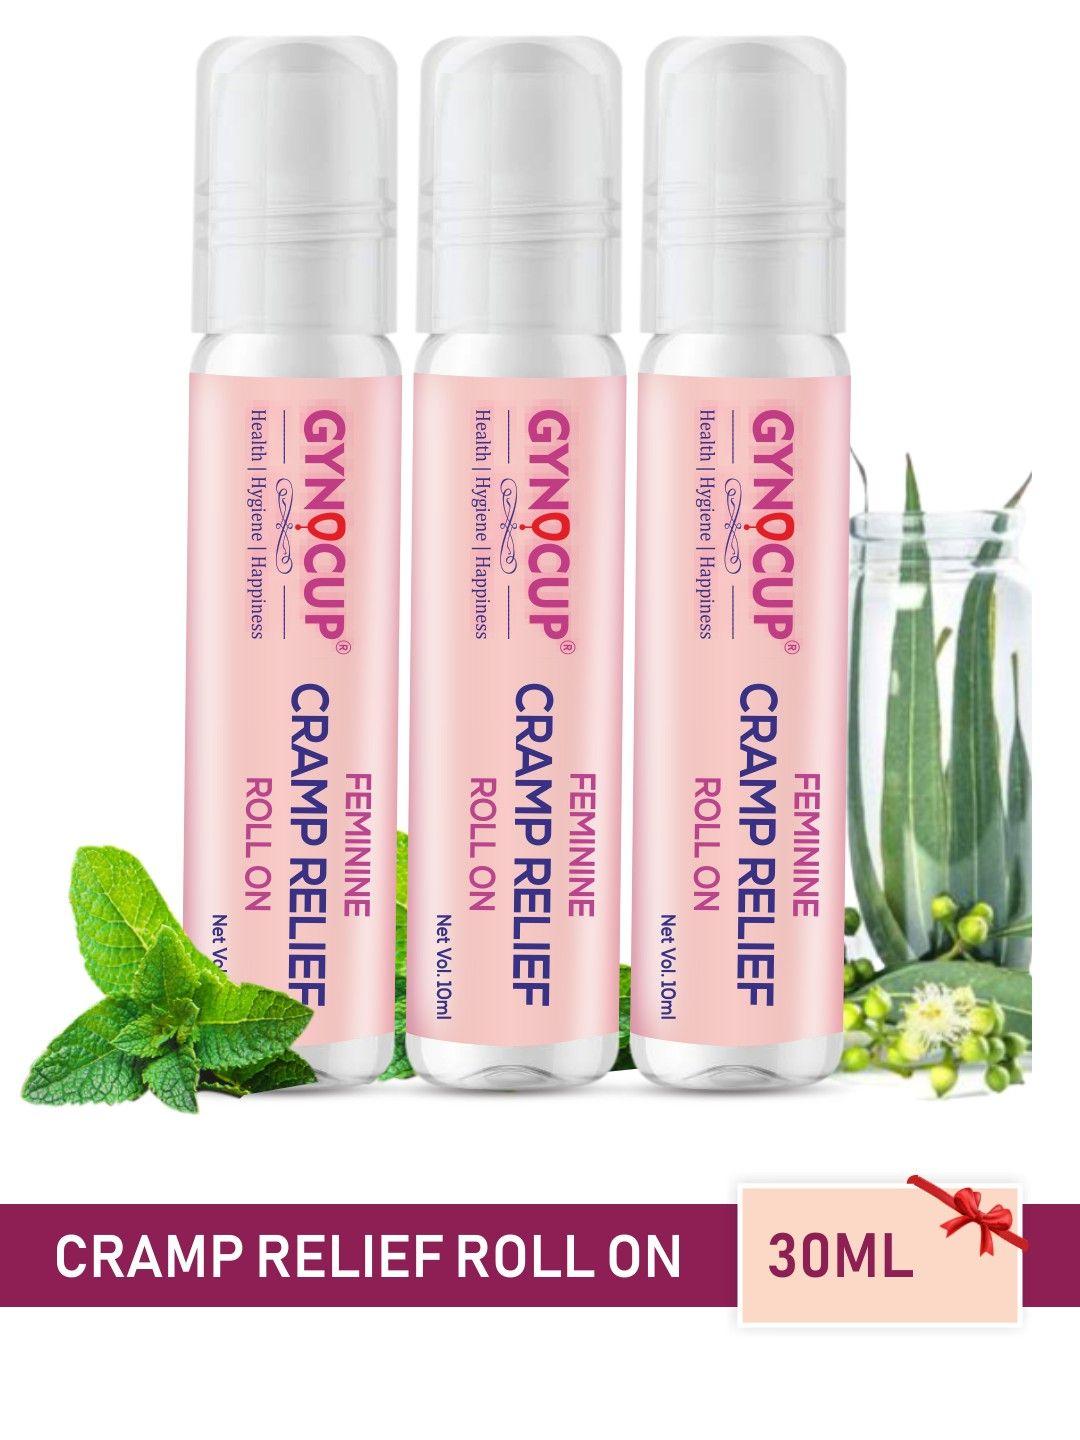 gynocup set of 3 feminine cramp relief roll-on all in one for periods & lower back pain